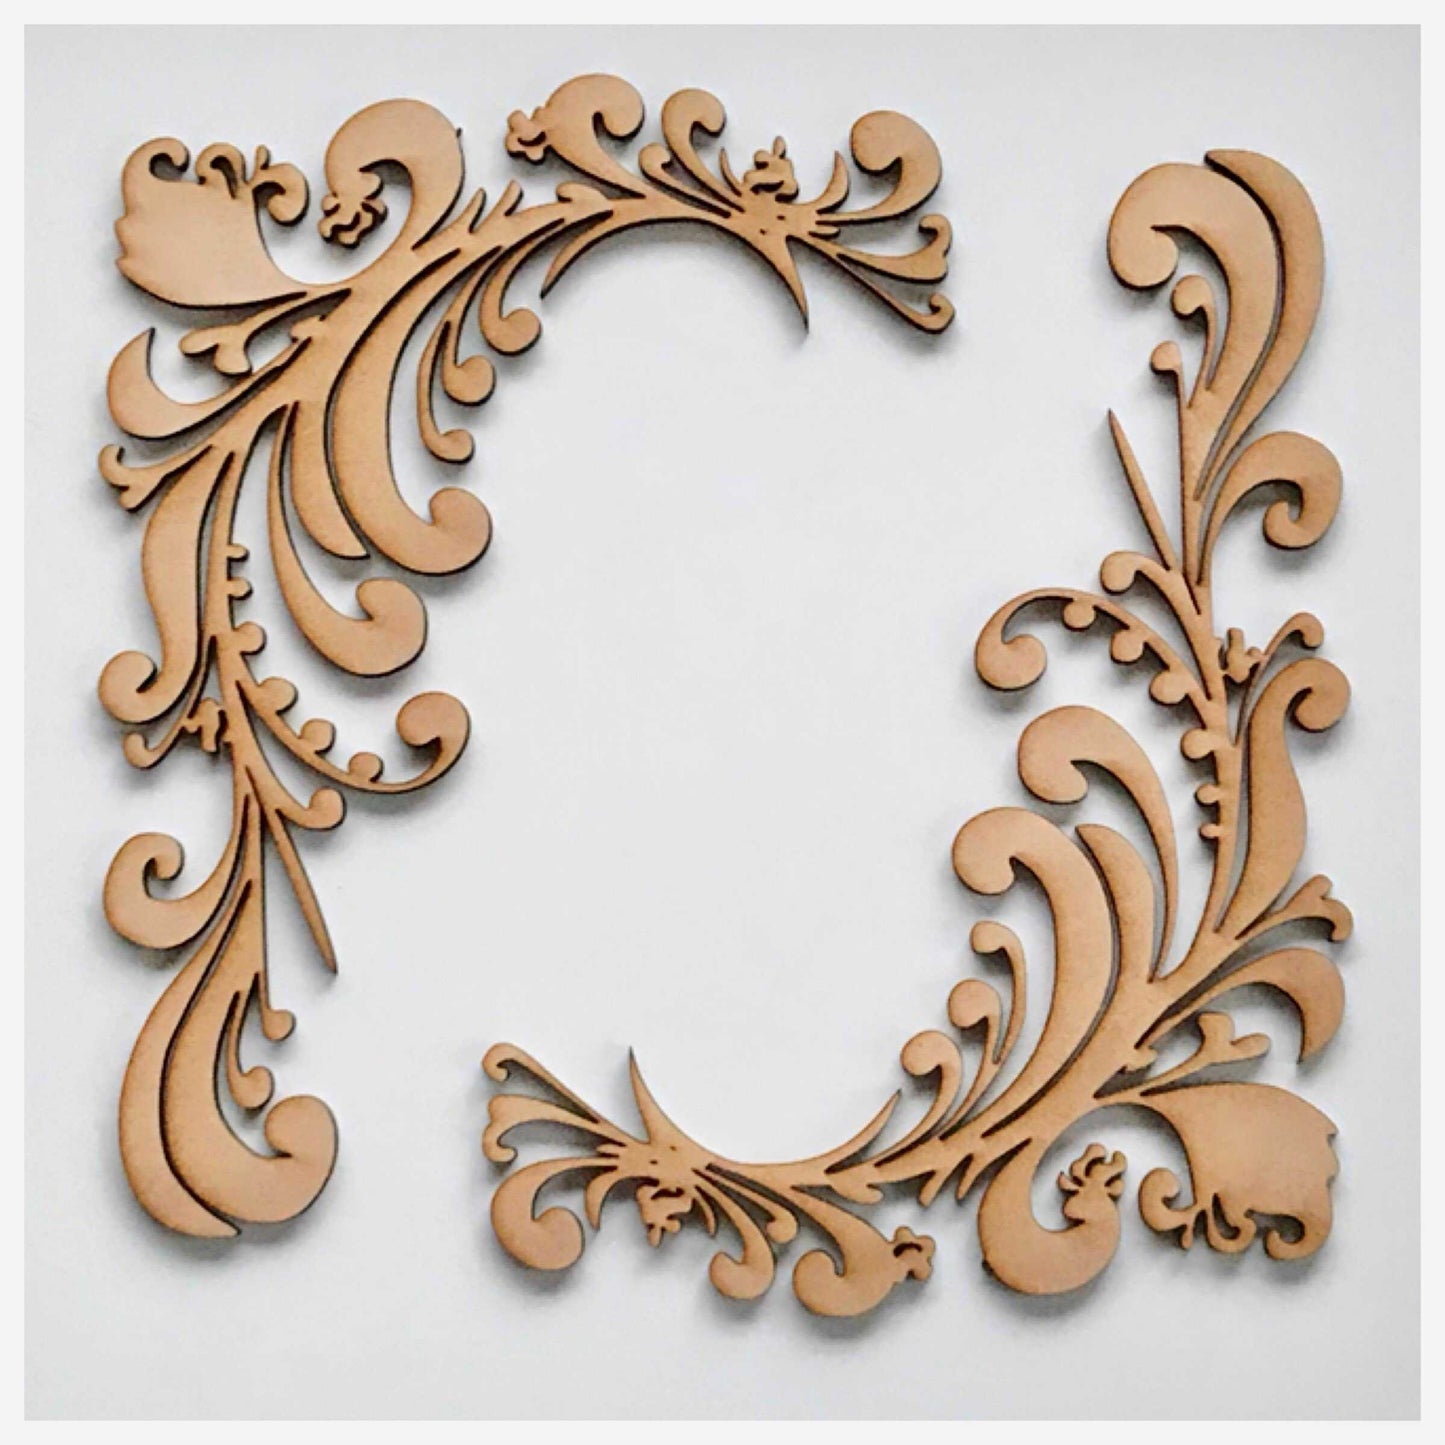 Decorative French Scroll Border MDF Wooden